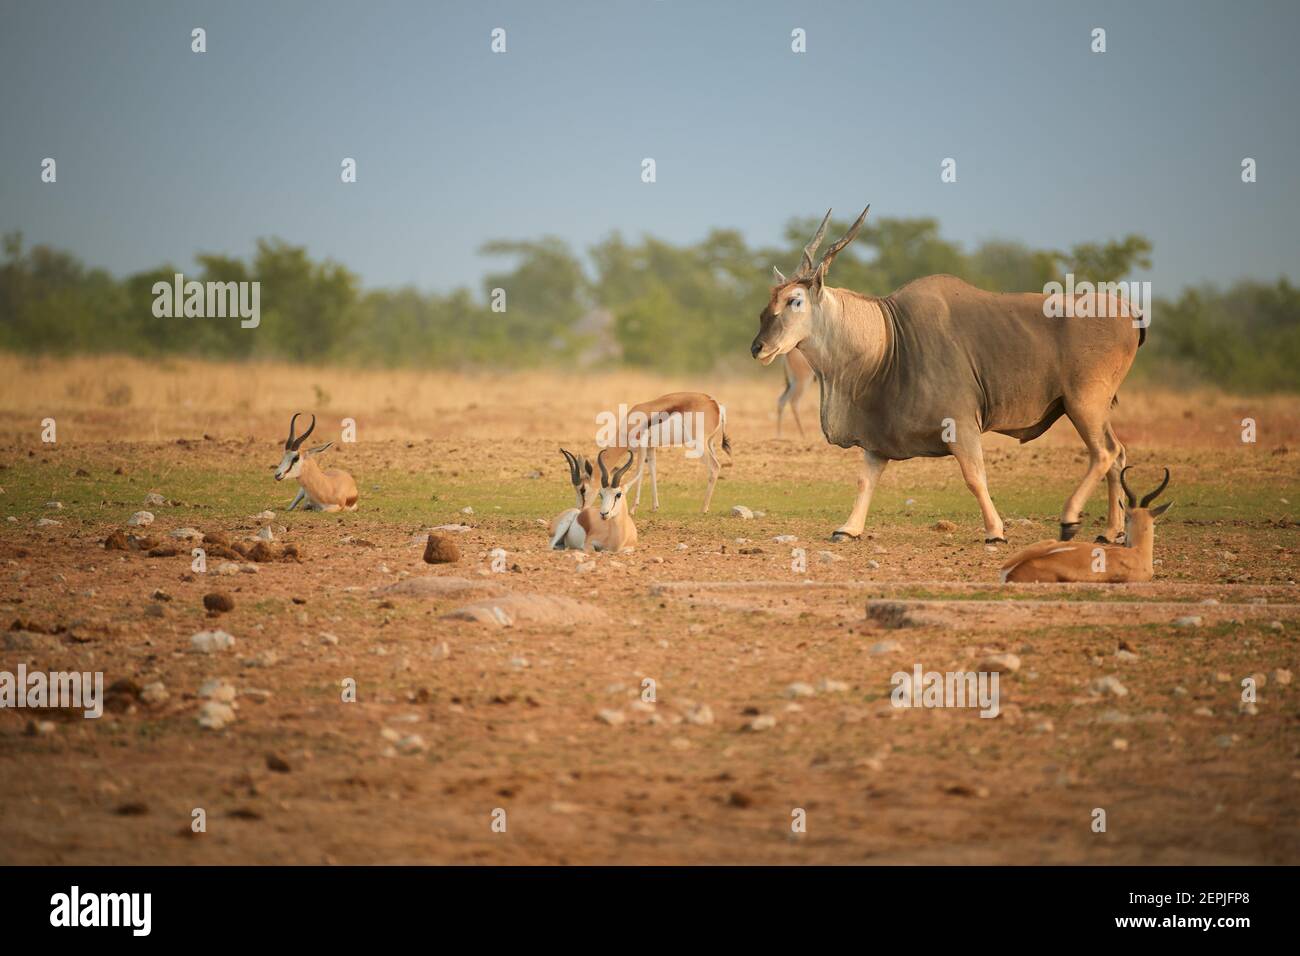 Eland antelope,Taurotragus oryx, largest and heaviest antelope in Africa, male with twisted horns walking in front of springboks,  in typical arid env Stock Photo